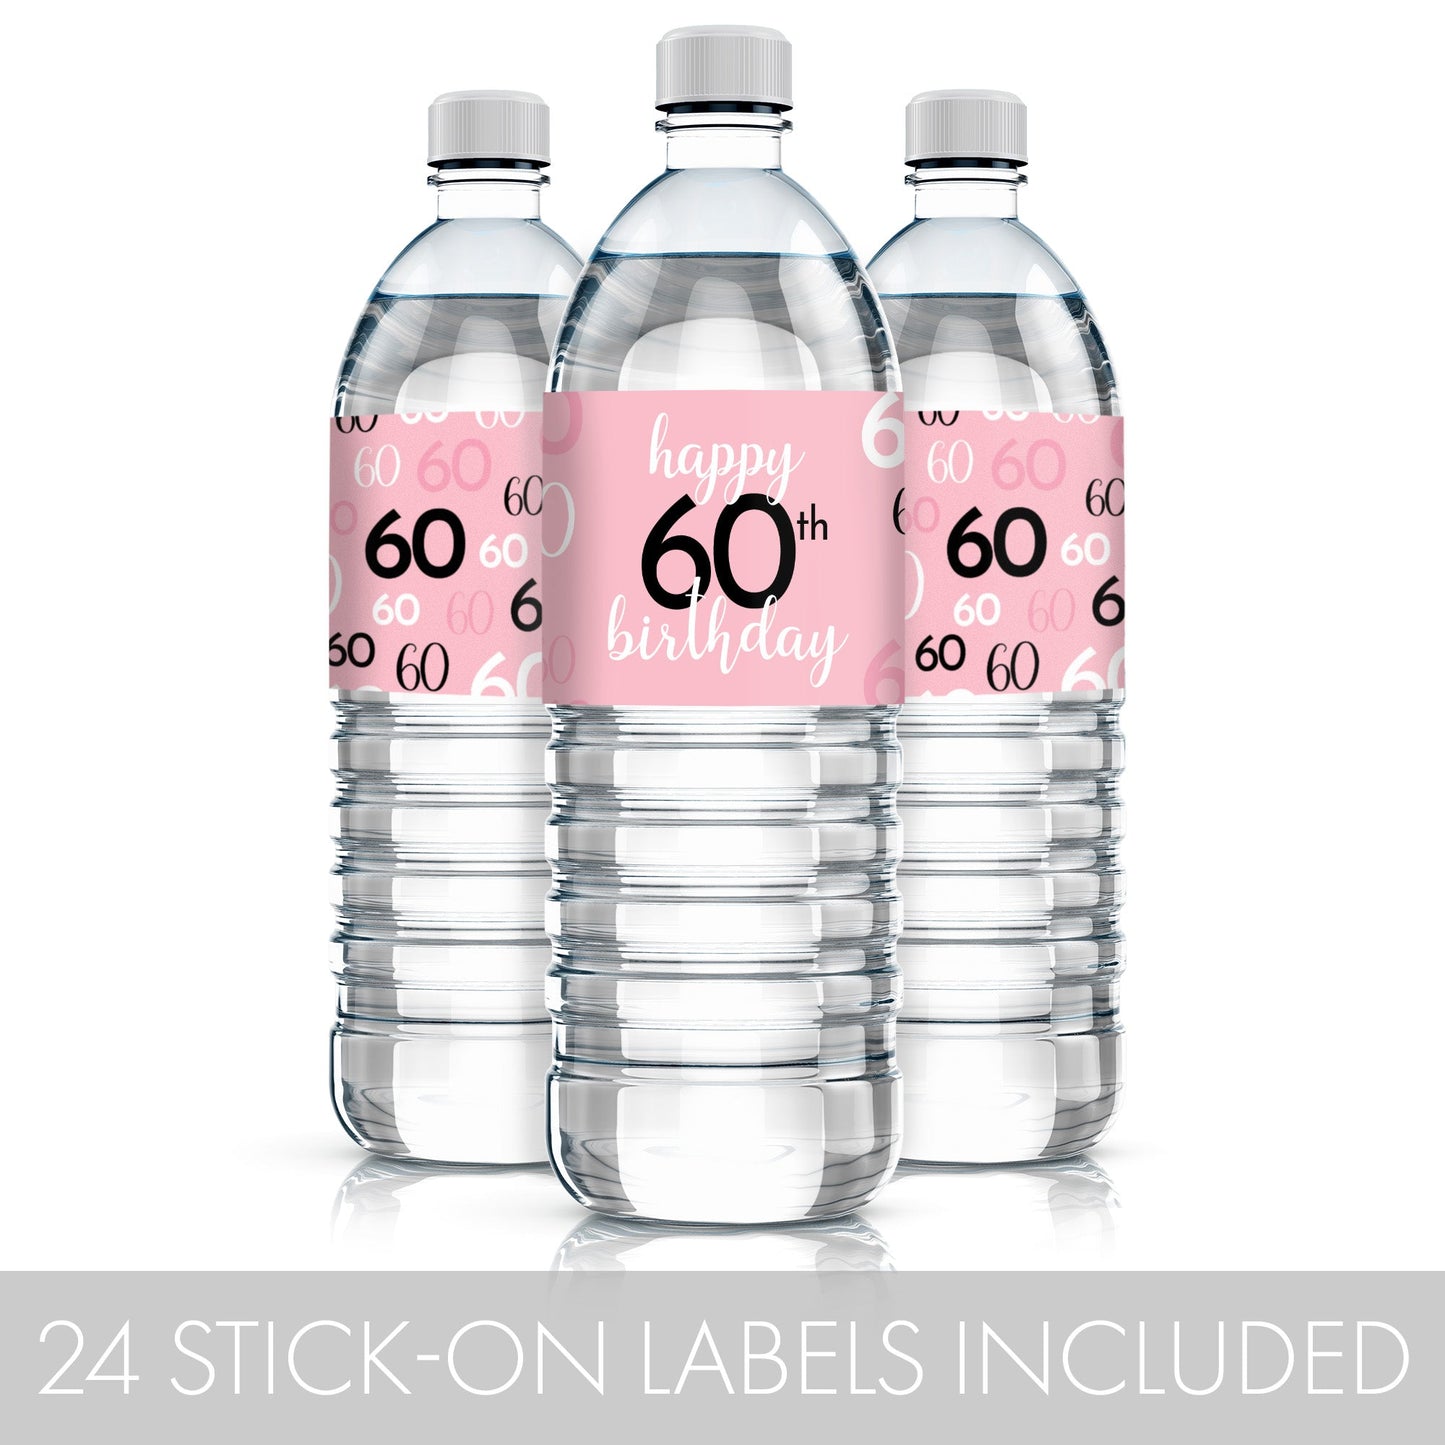 Eye-catching 60th birthday water bottle labels in pink and black with easy peel-and-stick application